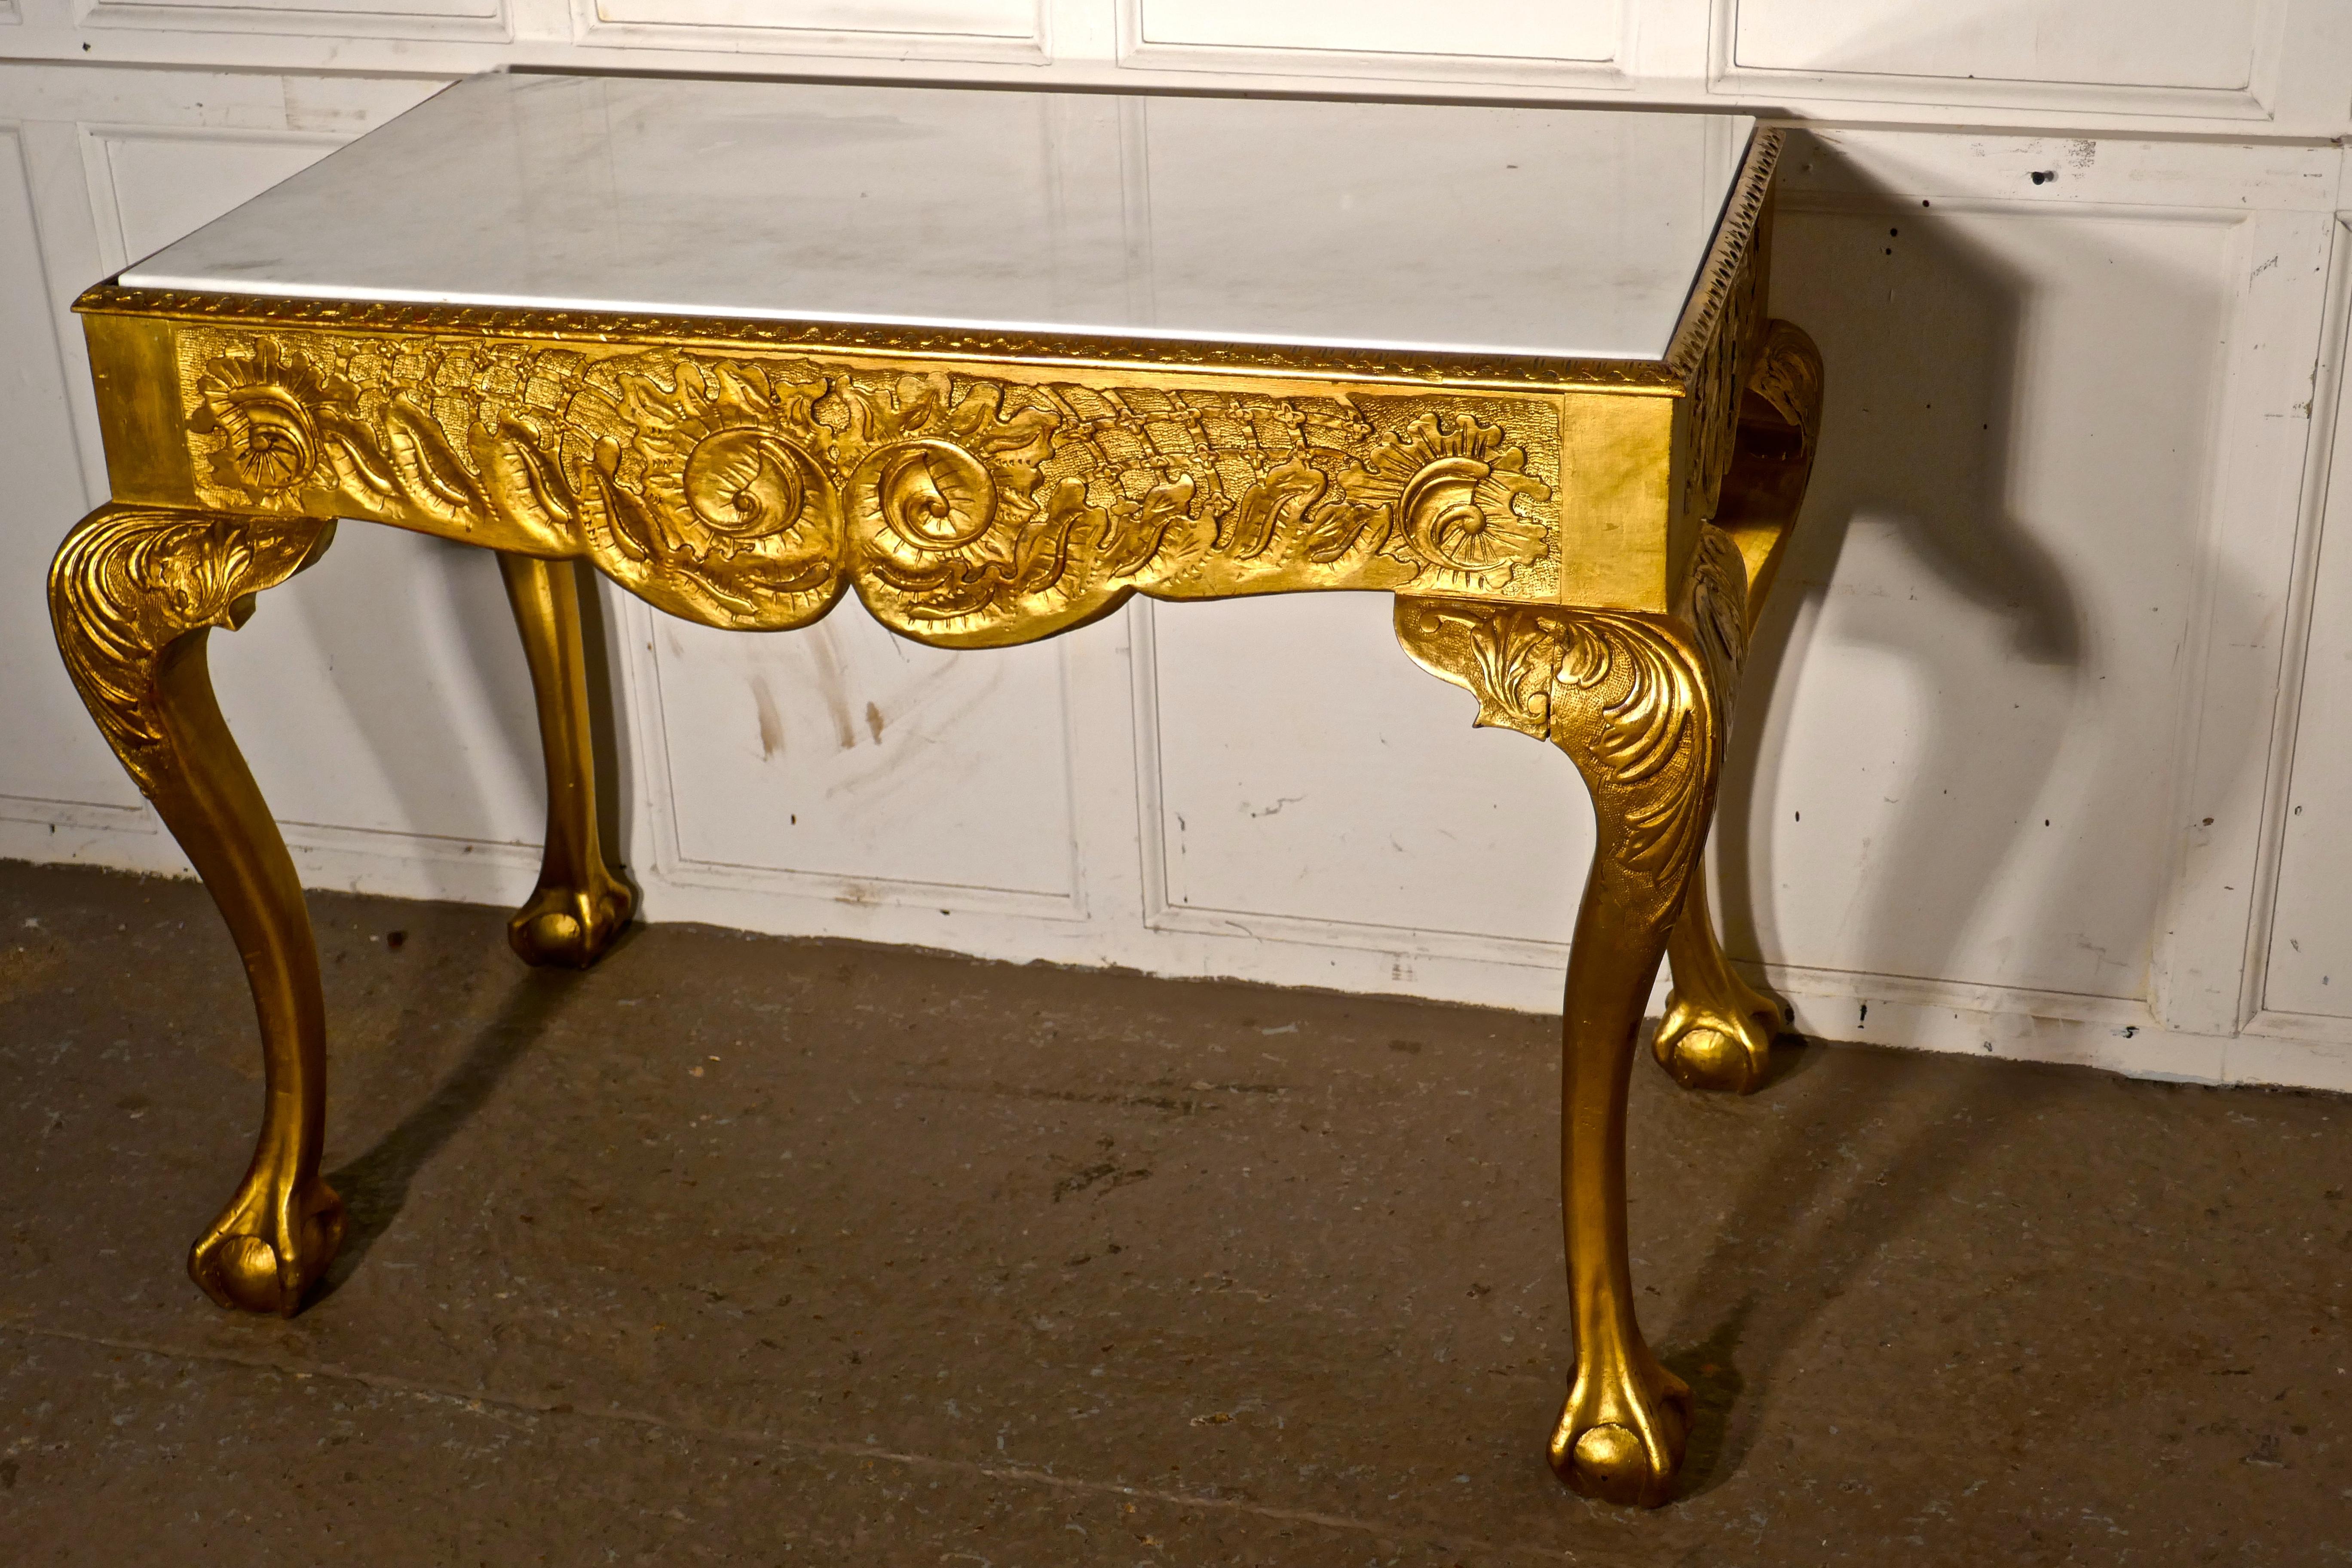 Rococo Revival 19th Century French Marble-Top Gilt Console or Hall Table